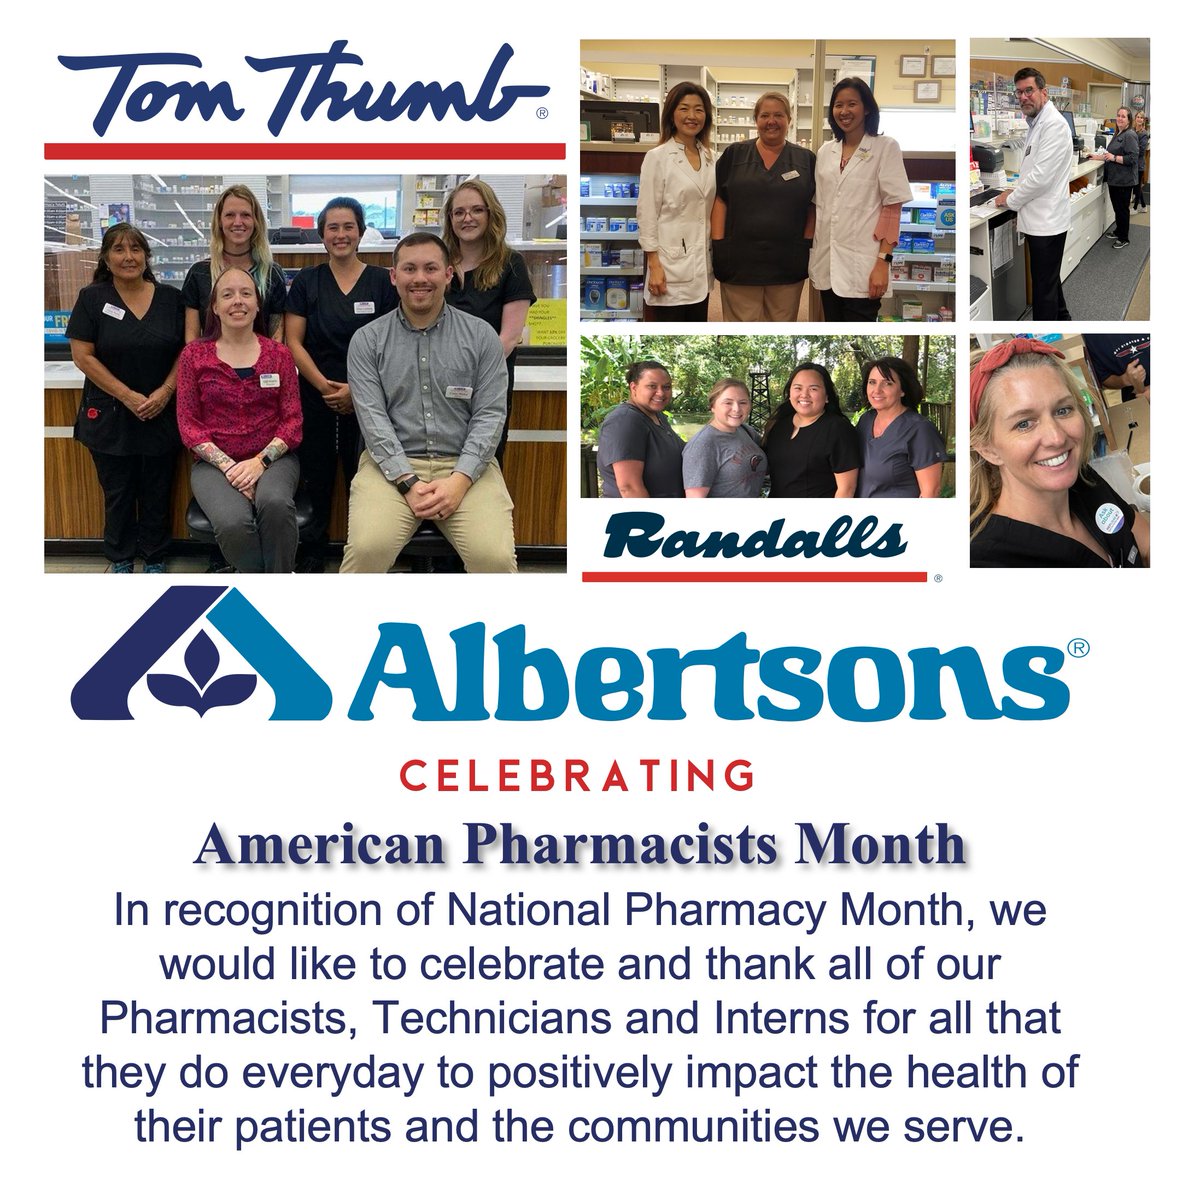 Thank you to our Pharmacy staff for your outstanding contributions to the health and wellbeing of our customers, employees and communities that you serve.